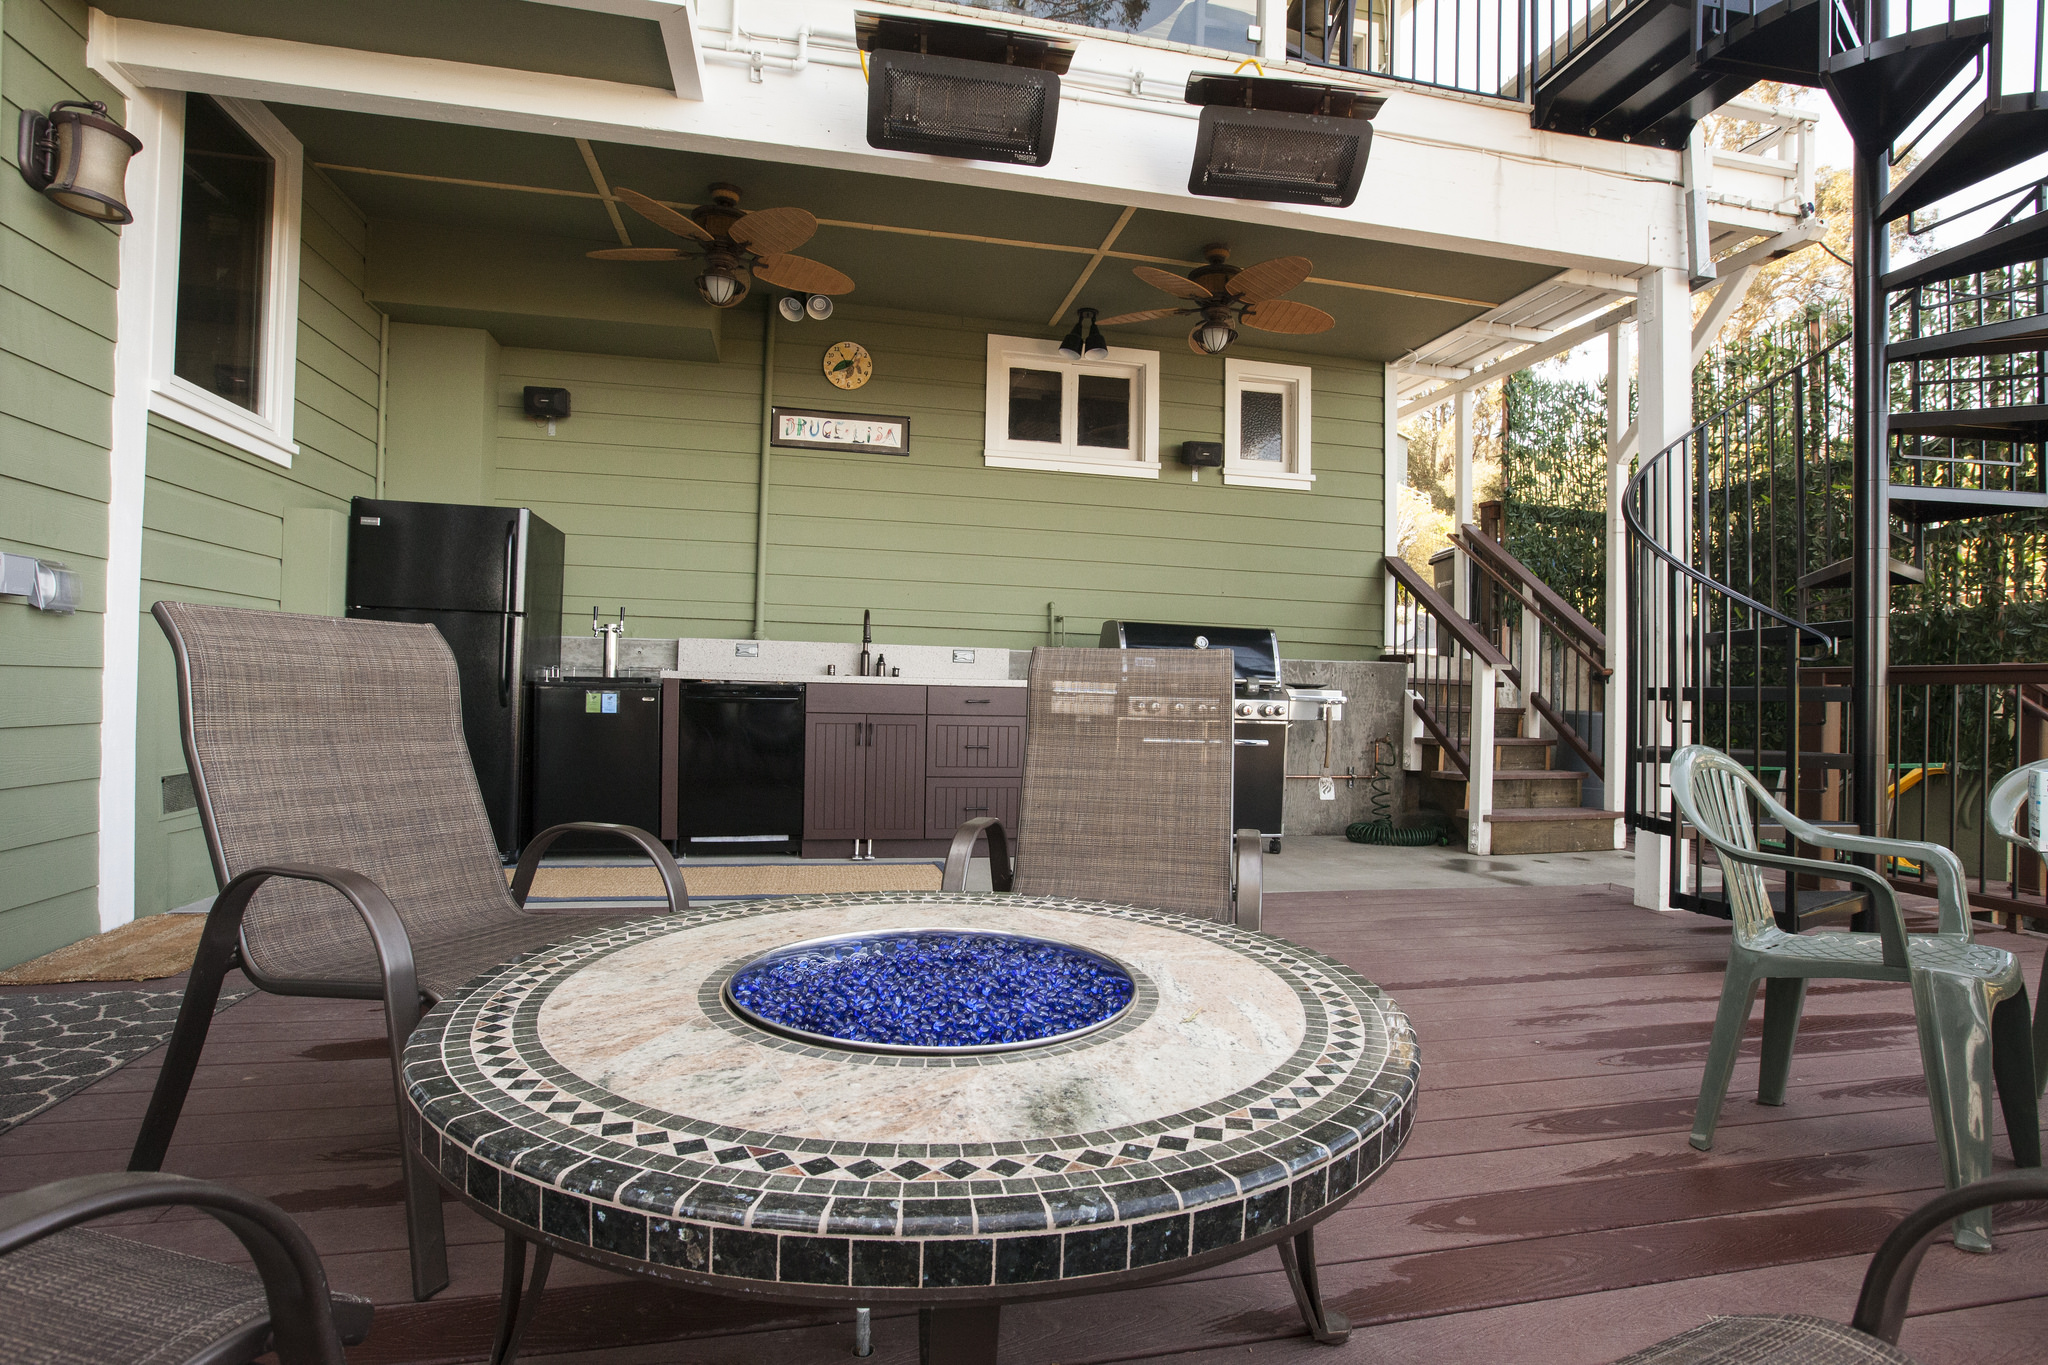  With all the additional space, a fun fire pit is added to the deck. In the background the spiral staircase and new outdoor kitchen can be seen. 